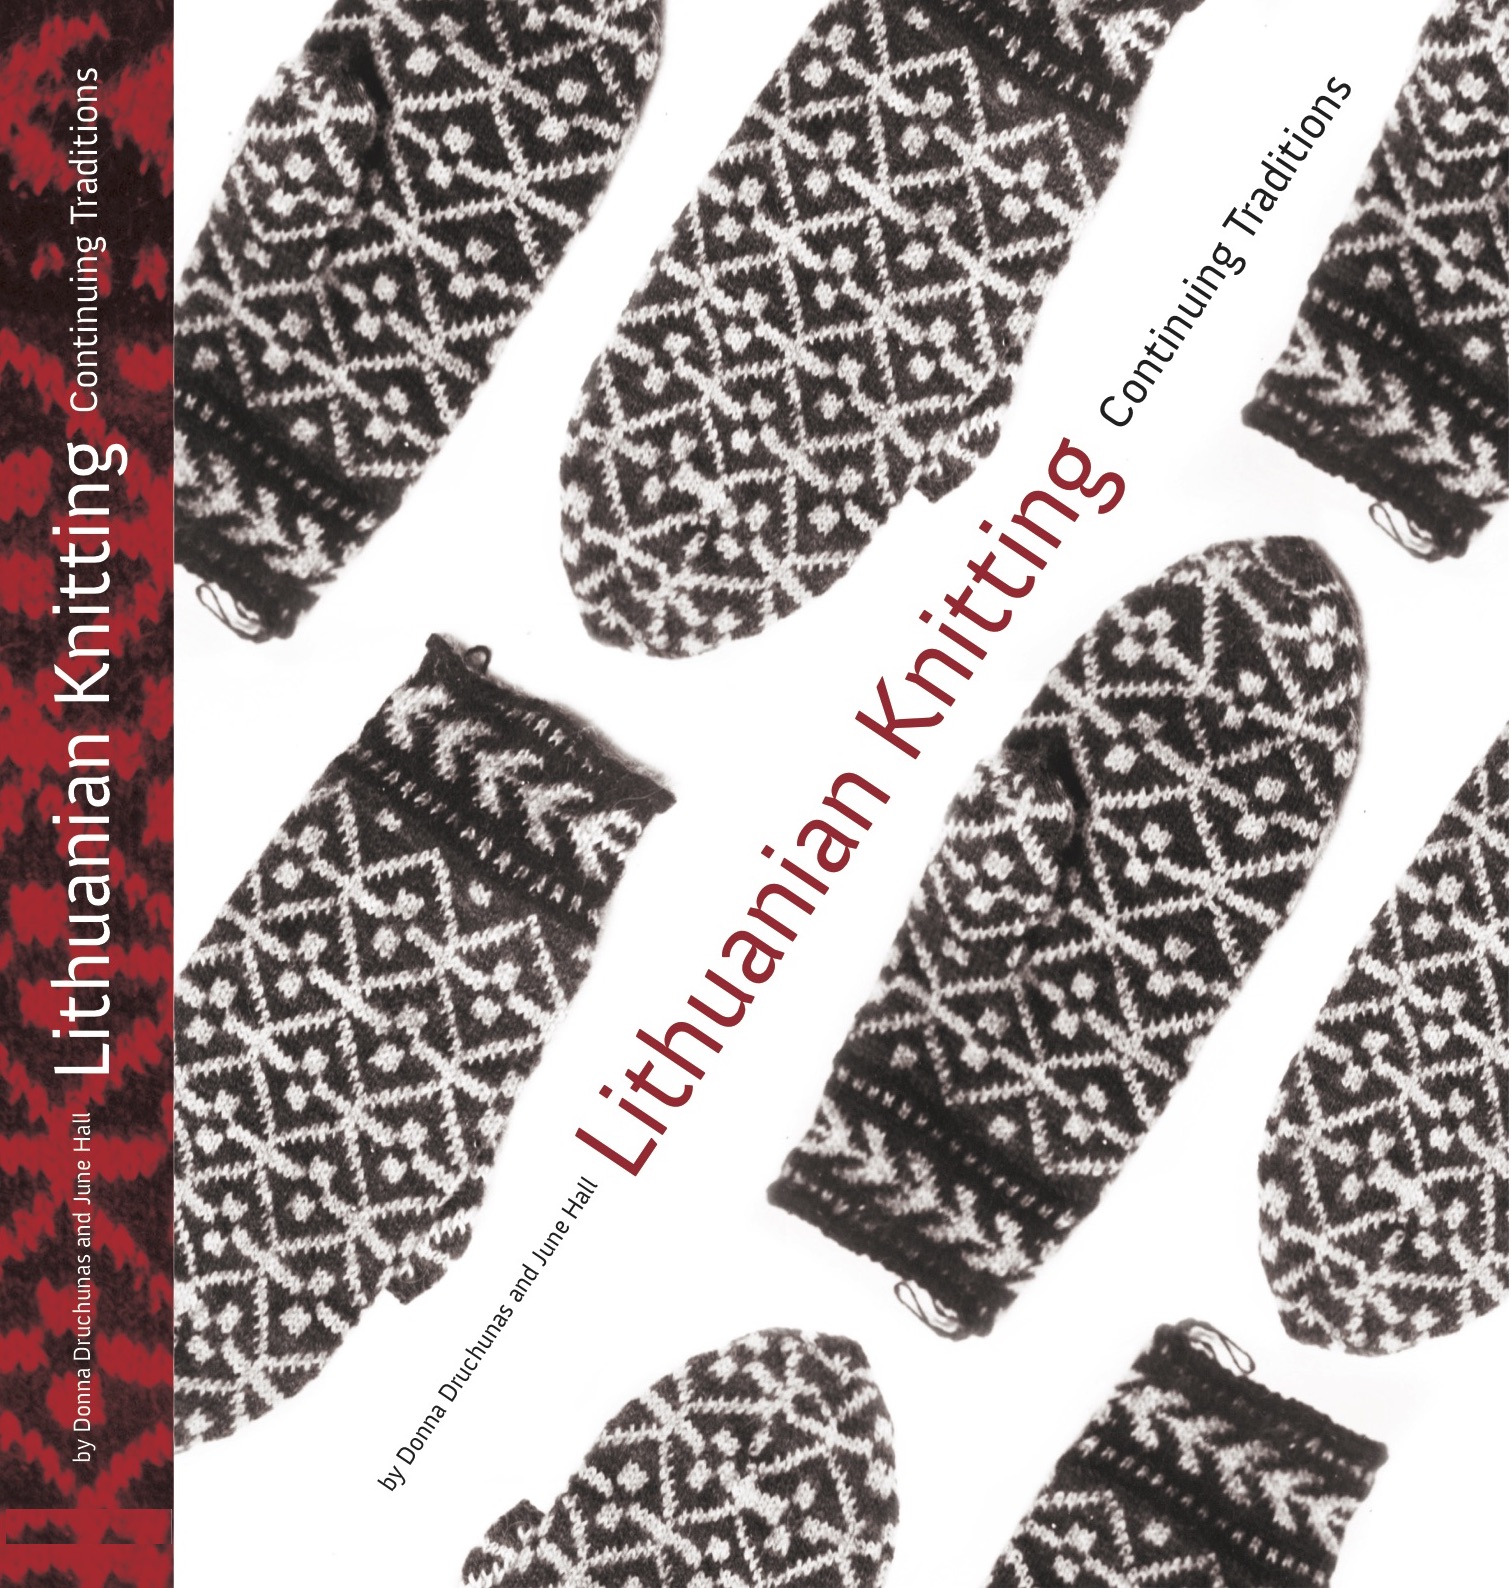 Lithuanian Knitting book cover